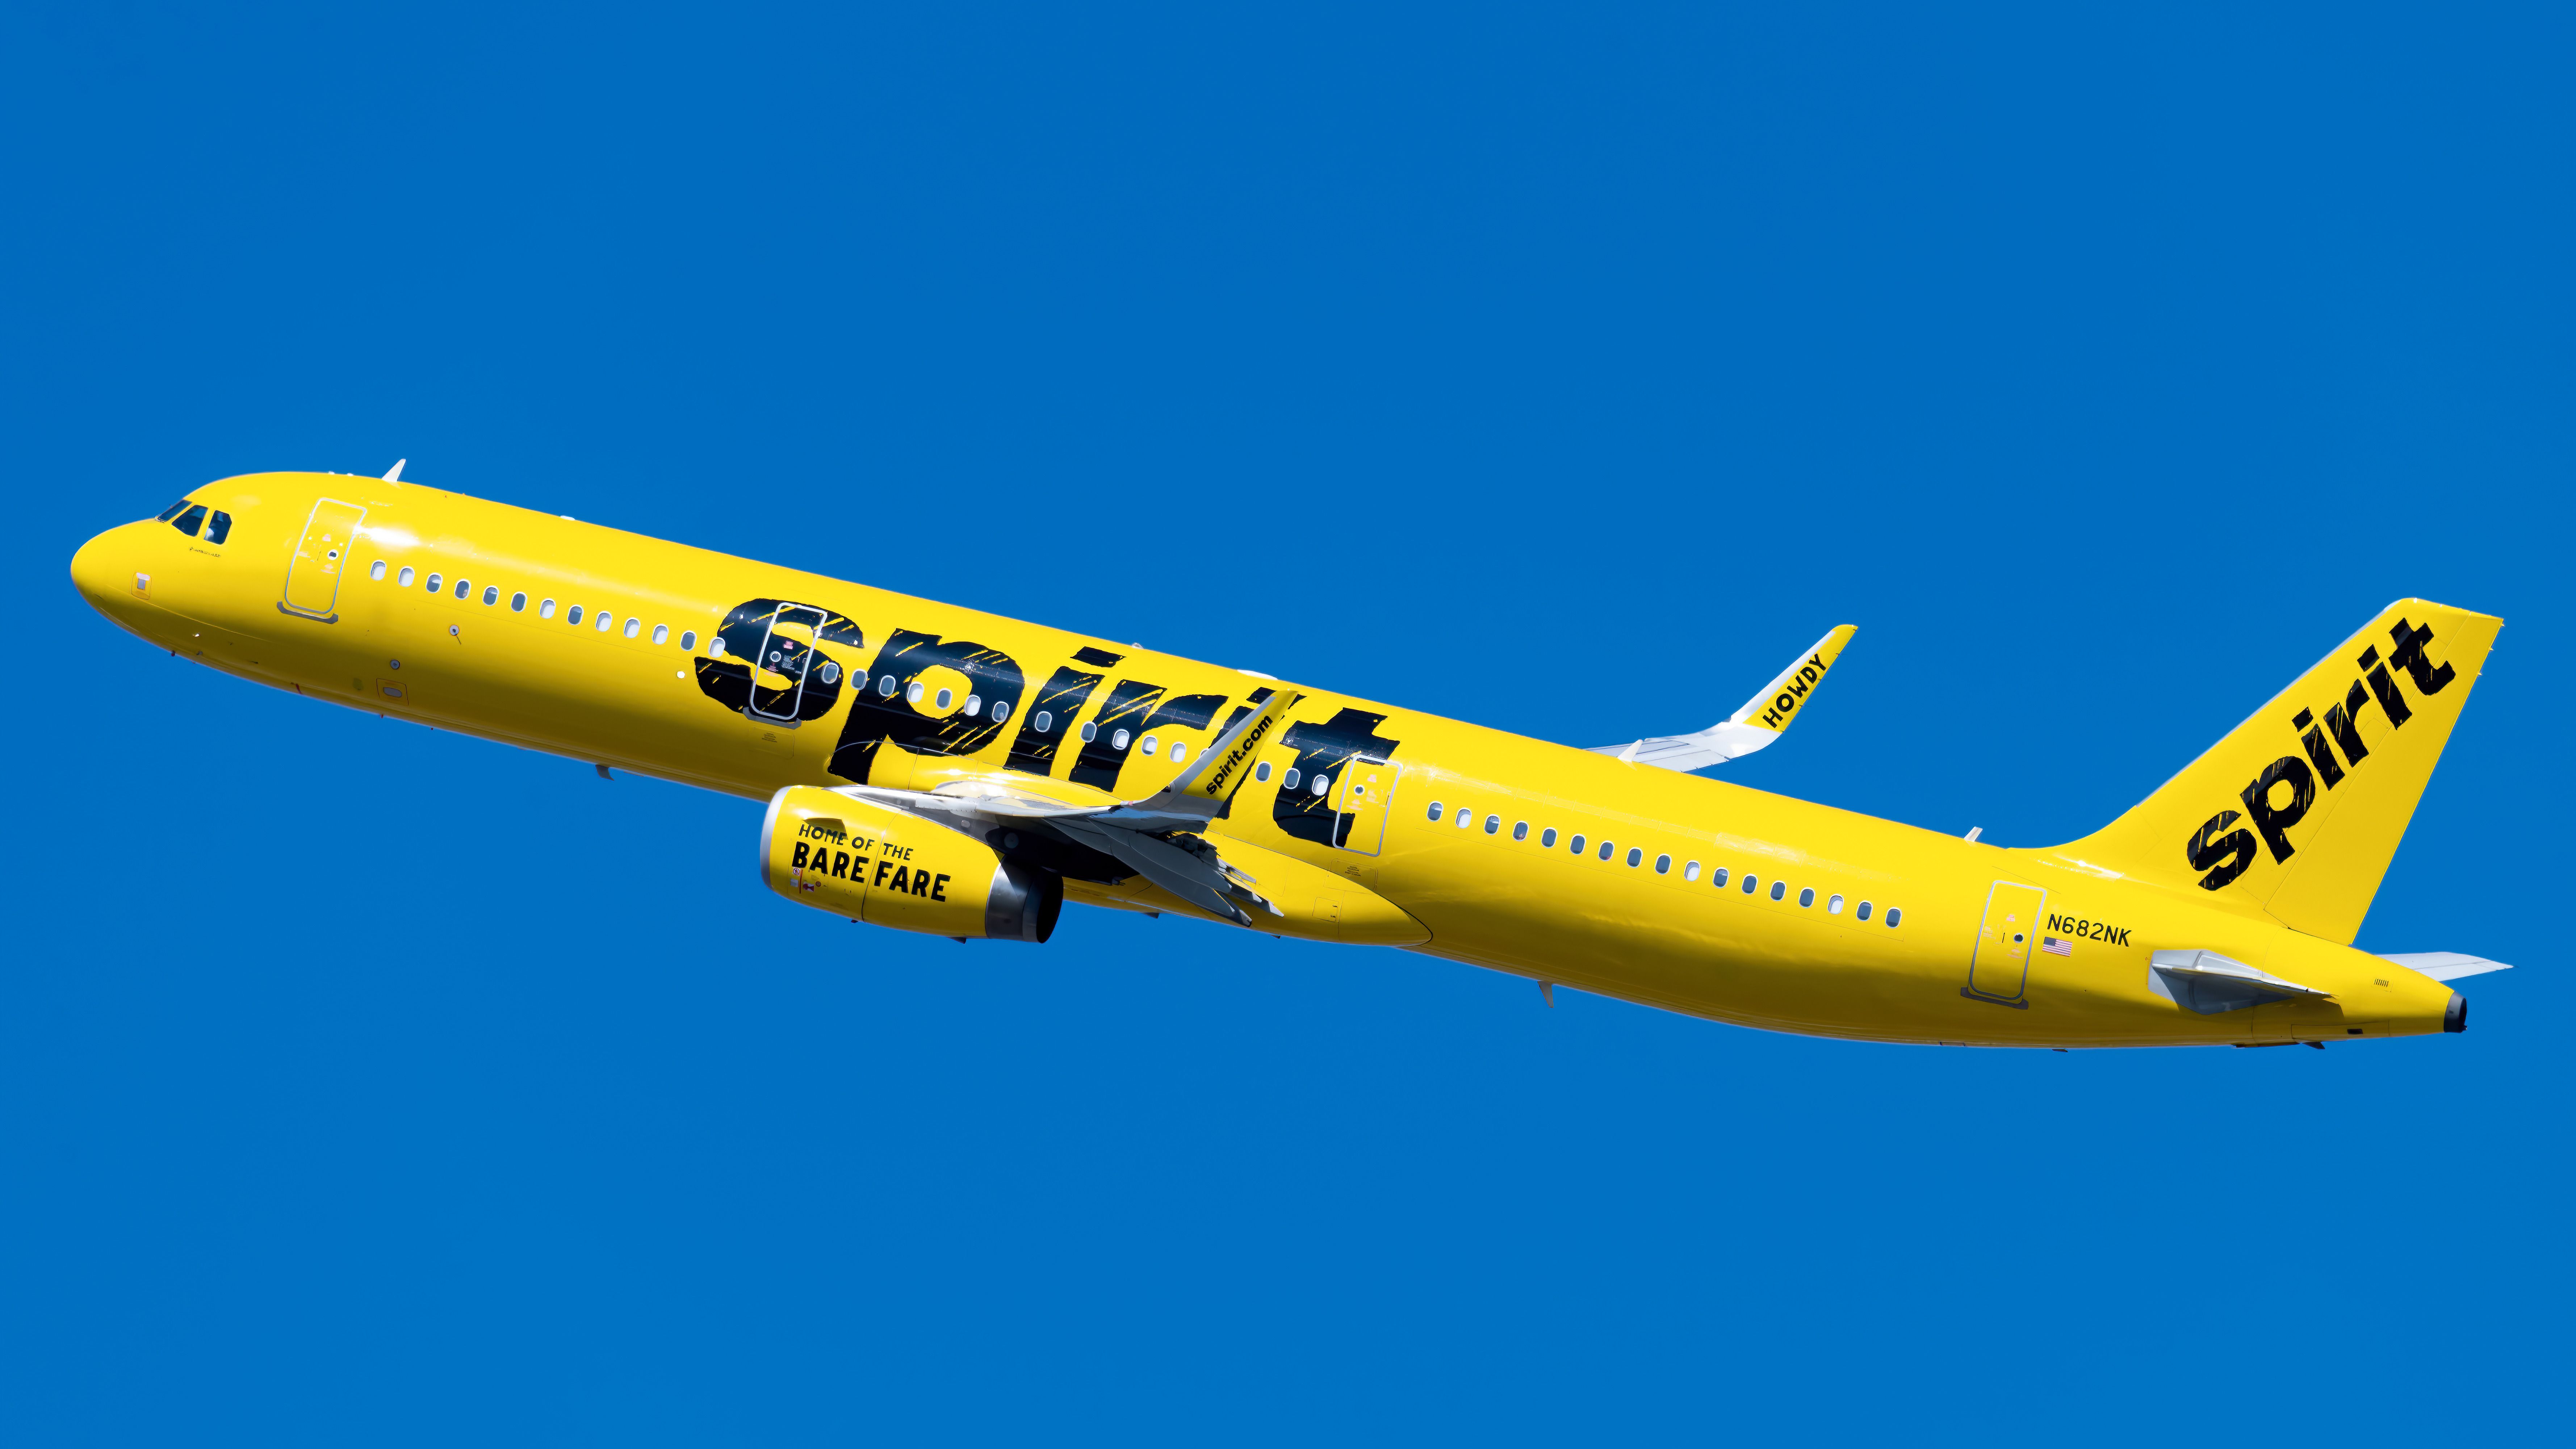 Focus On Florida: Spirit Airlines Loses Ground As Competitors Expand In The Popular Tourist Market